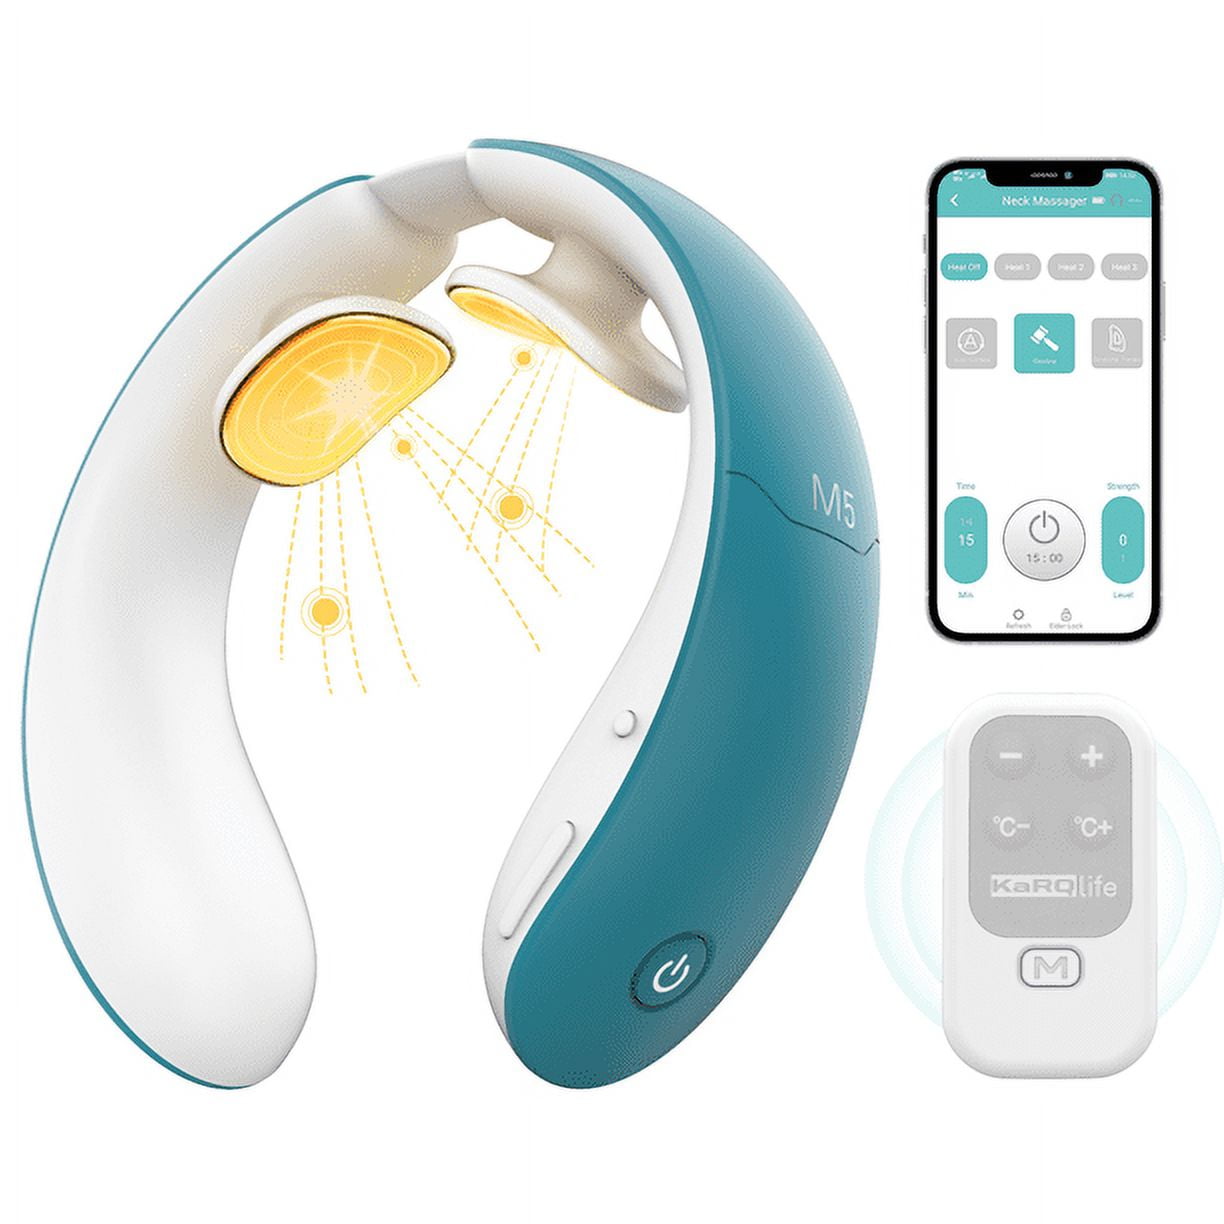 RelaxUltima Portable Neck Massager: save $60 on a device that's designed to  help you relax